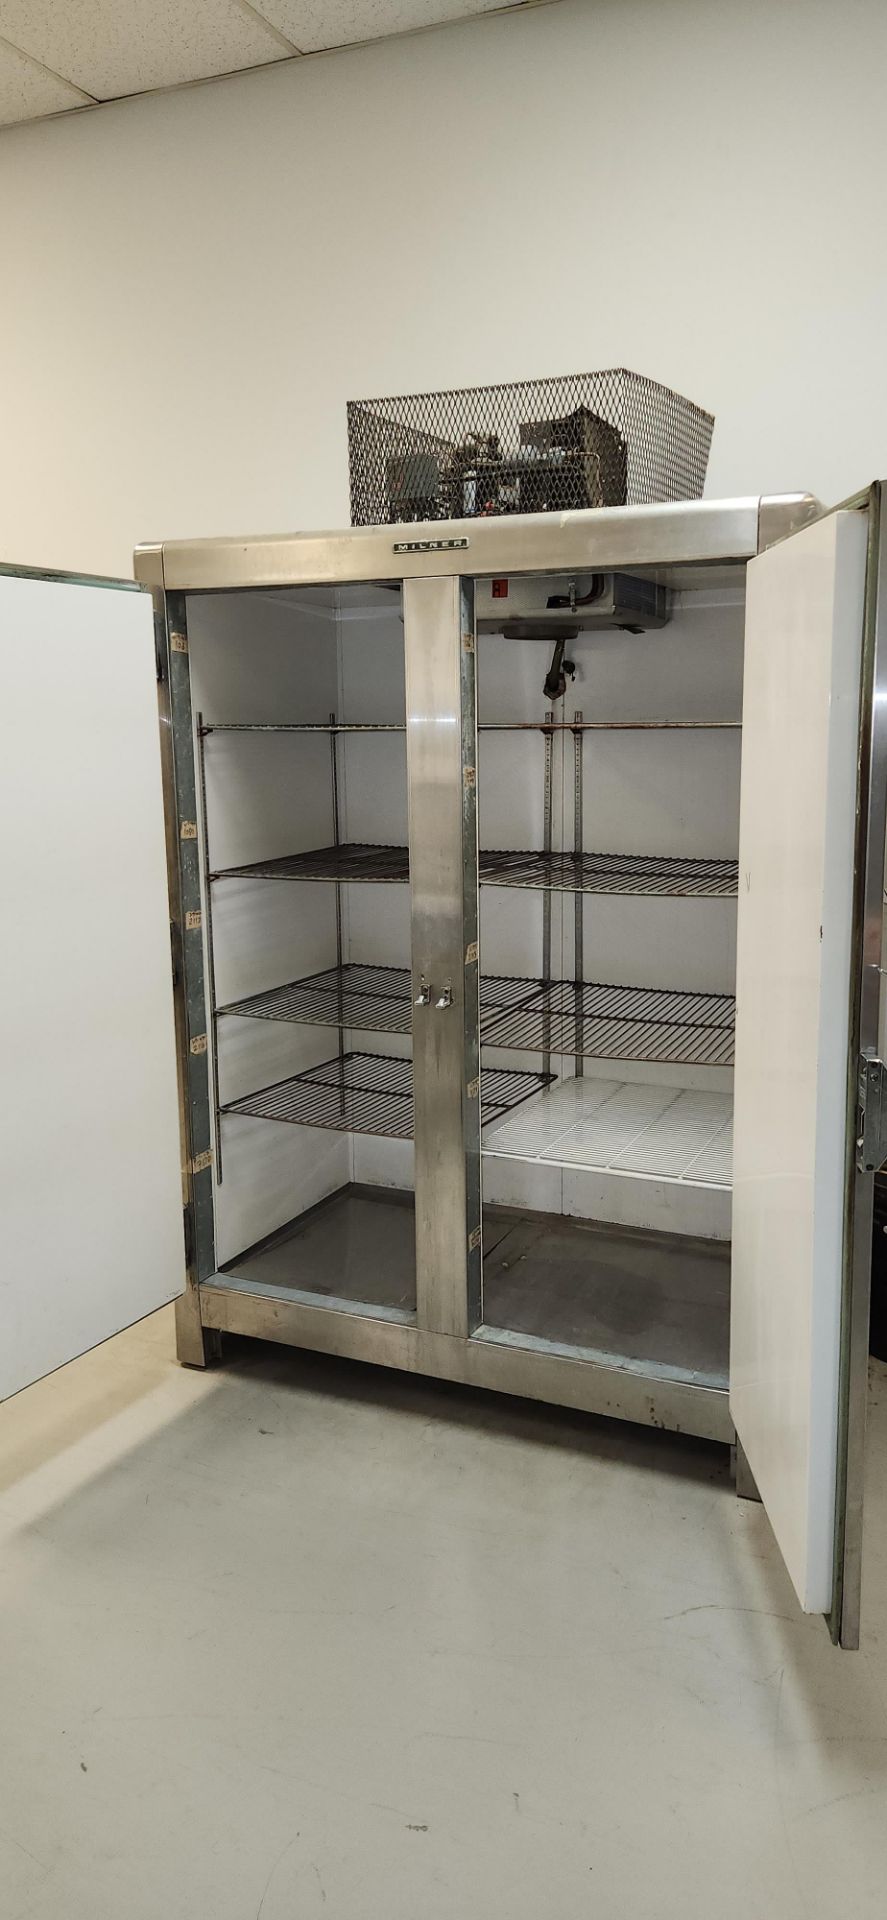 MILNER RSS45COT FRIDGE, APPROX. 54"W X 6'H X 30"D - Image 2 of 4